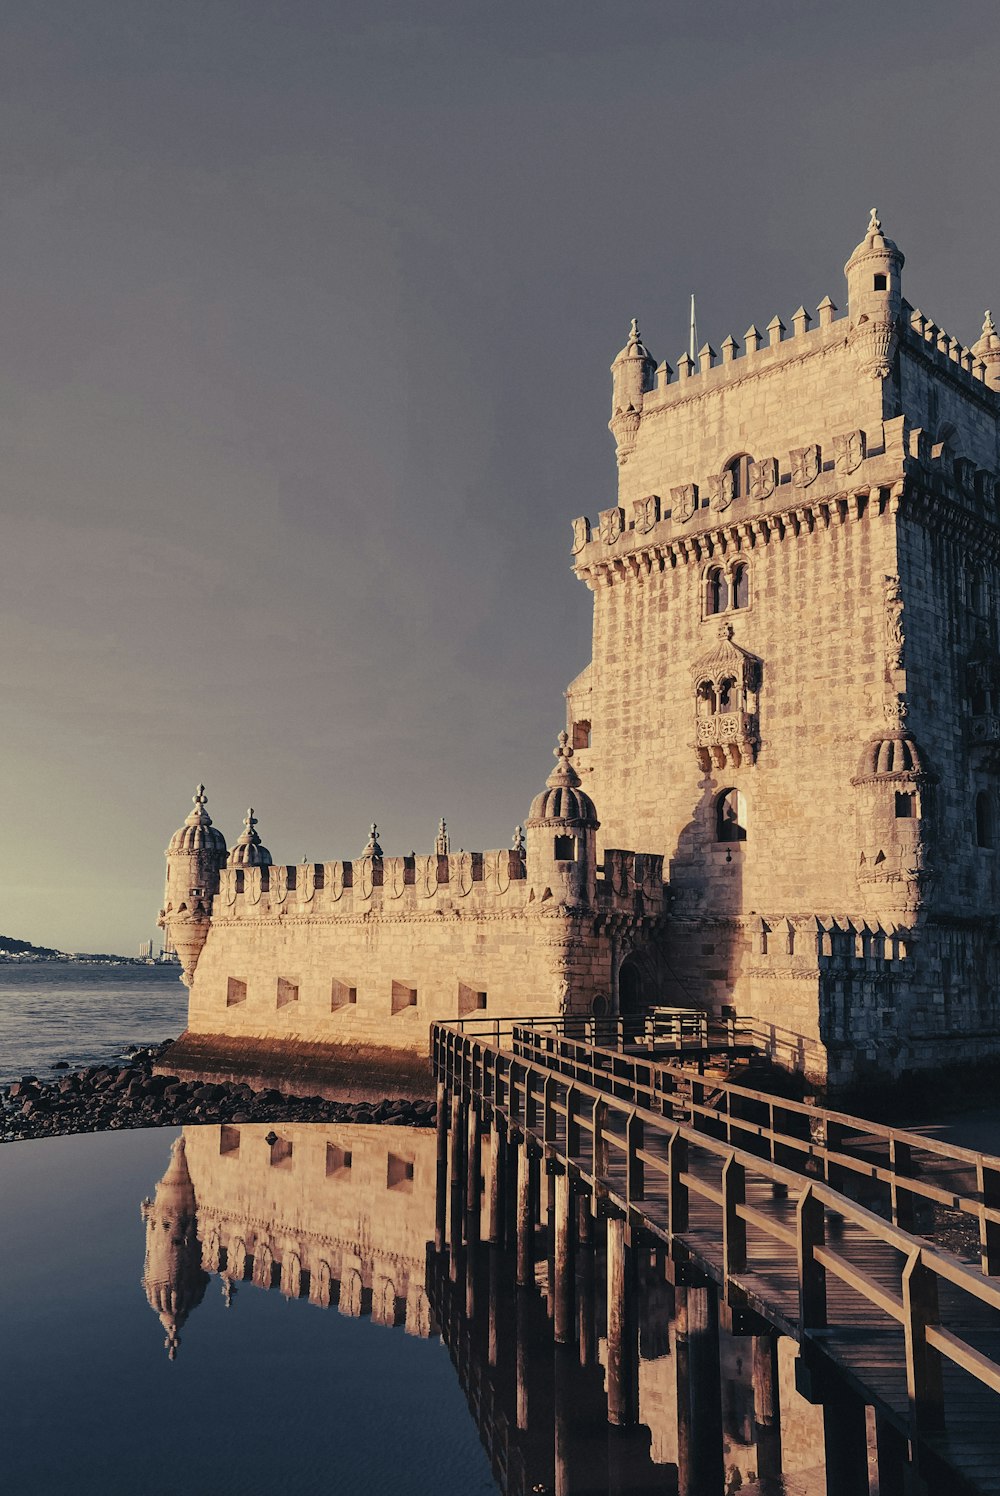 a large castle sitting next to a body of water